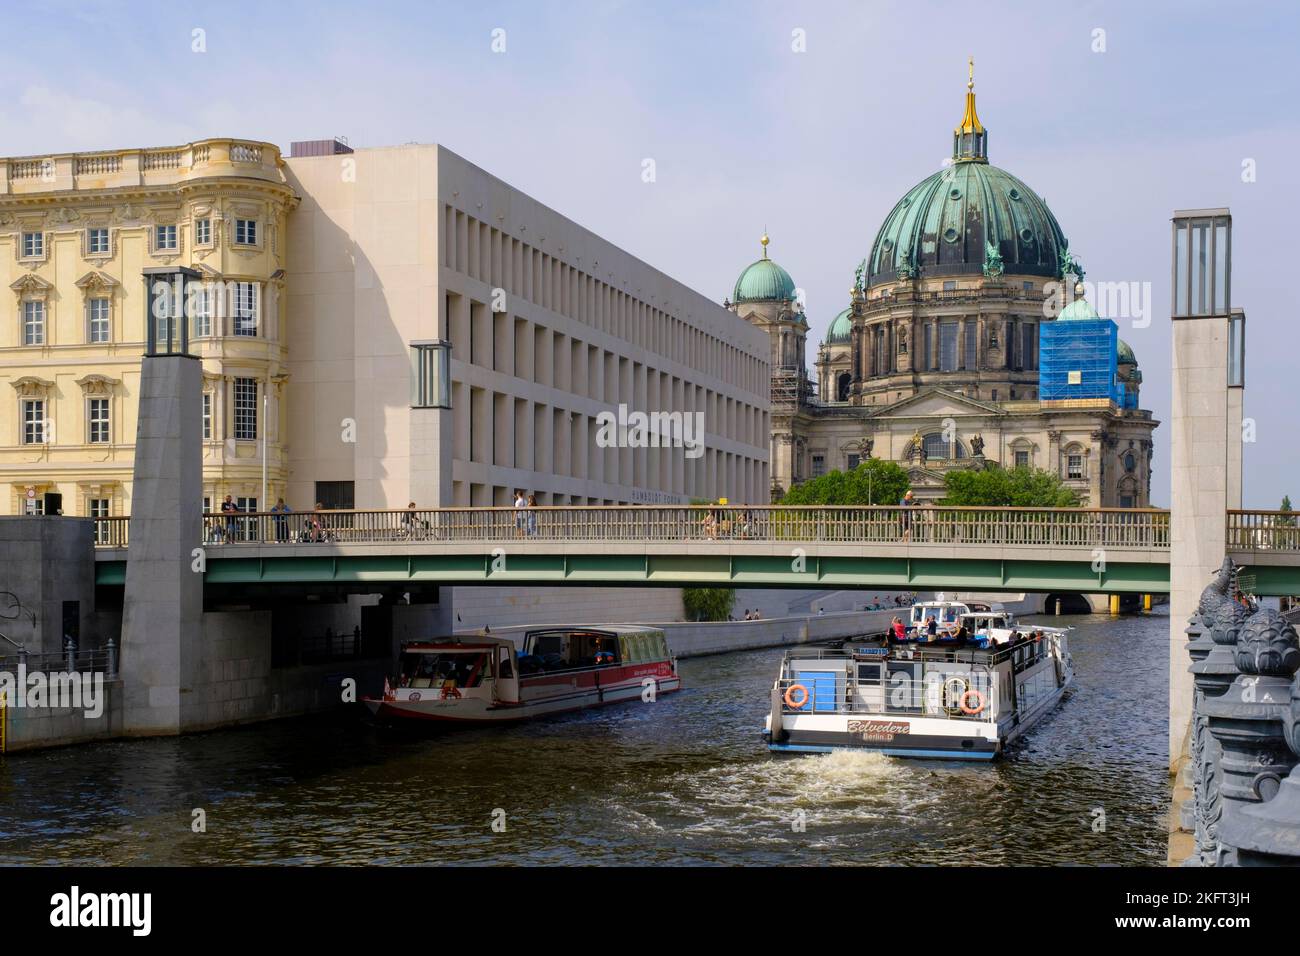 Excursion boats on the Spree, Humboldt Forum, Berlin Cathedral, Nikolai Quarter, Berlin, Germany, Europe Stock Photo